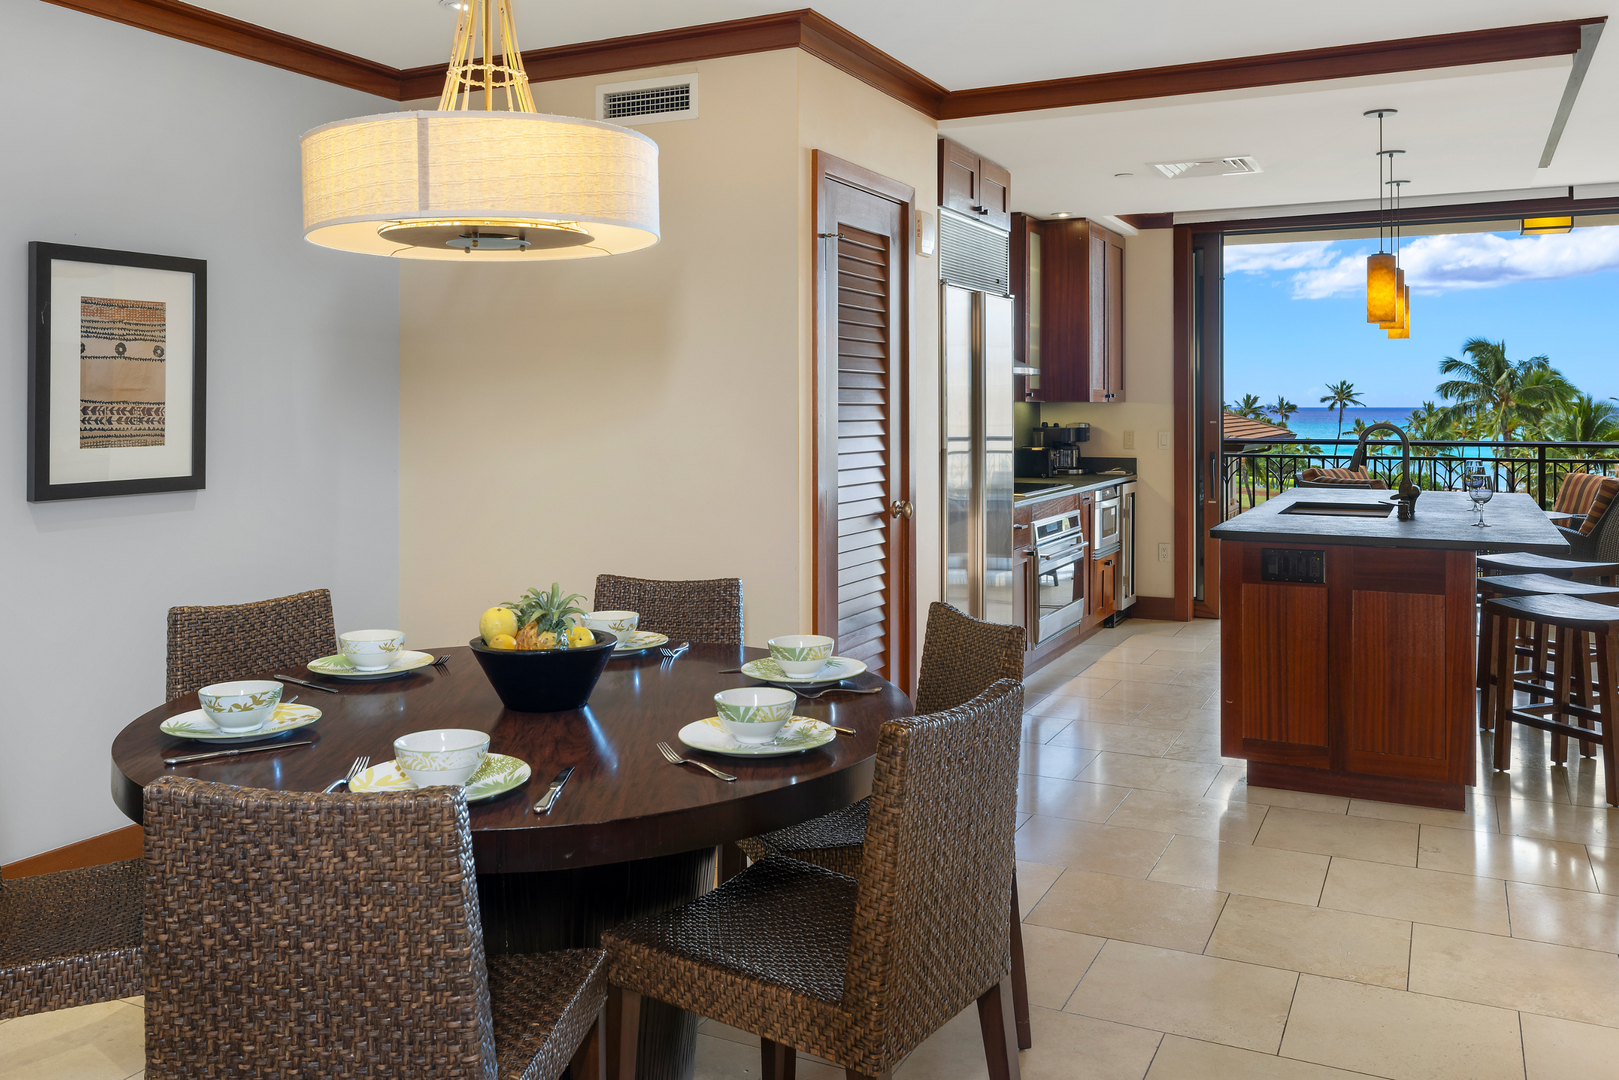 Kapolei Vacation Rentals, Ko Olina Beach Villas O505 - Open-living floor plan where you can enjoy views from every space.